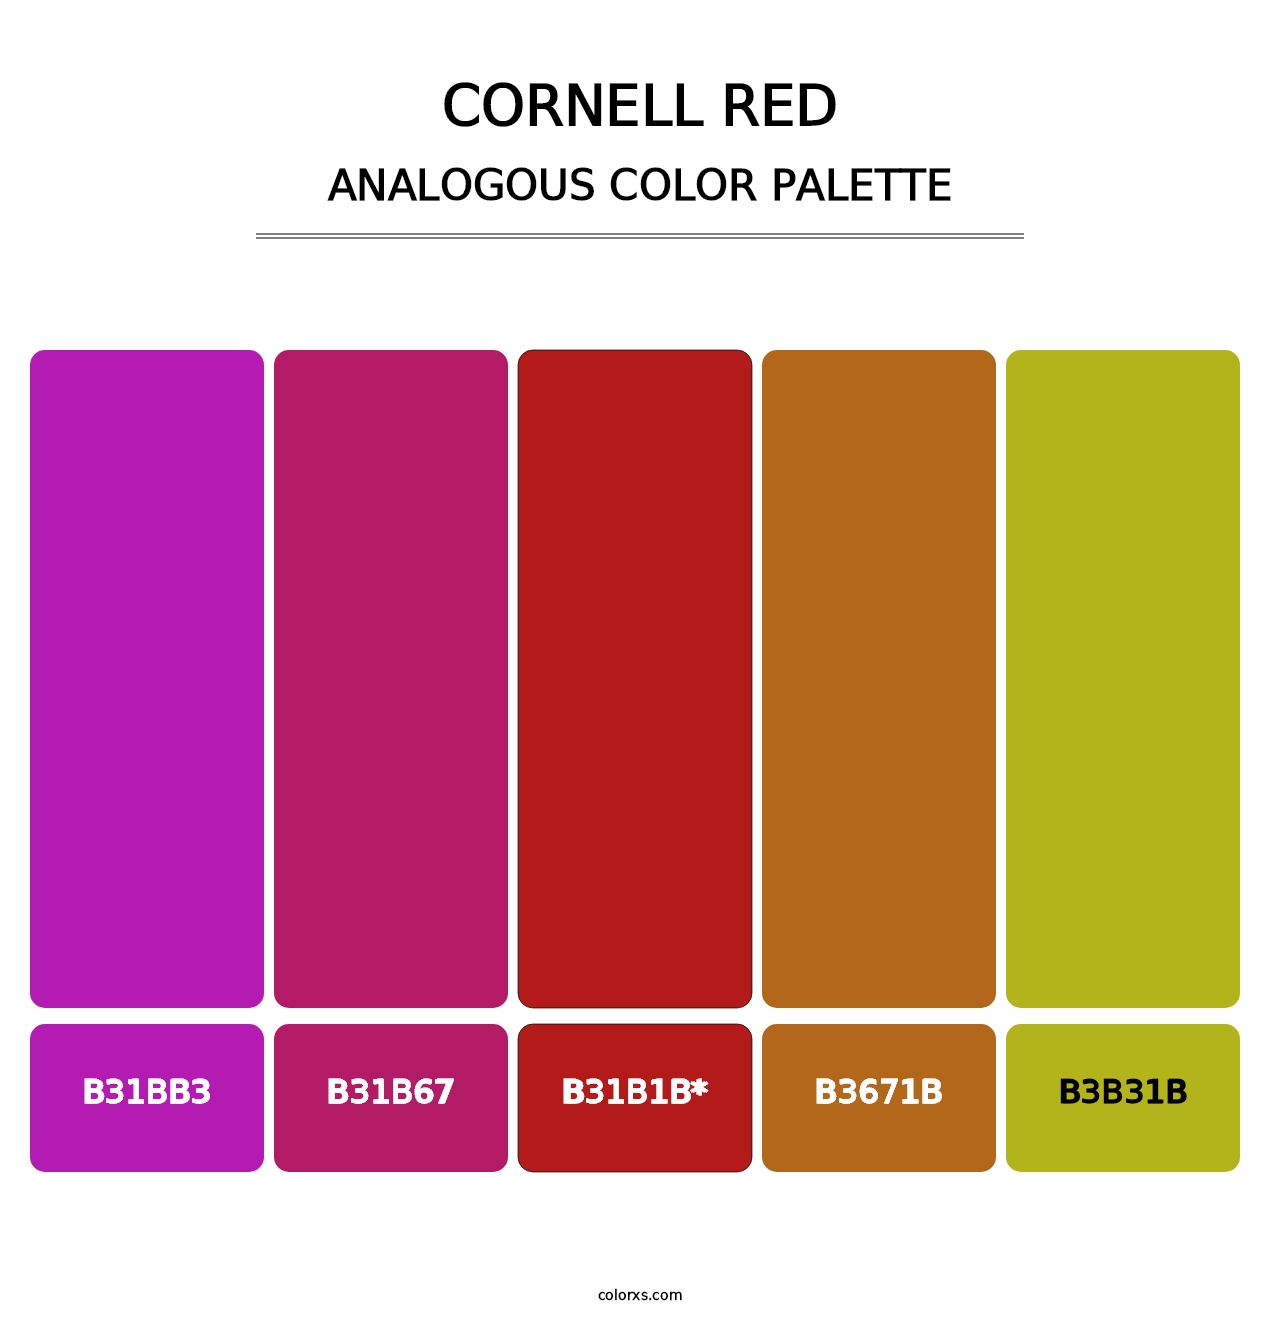 Cornell Red - Analogous Color Palette